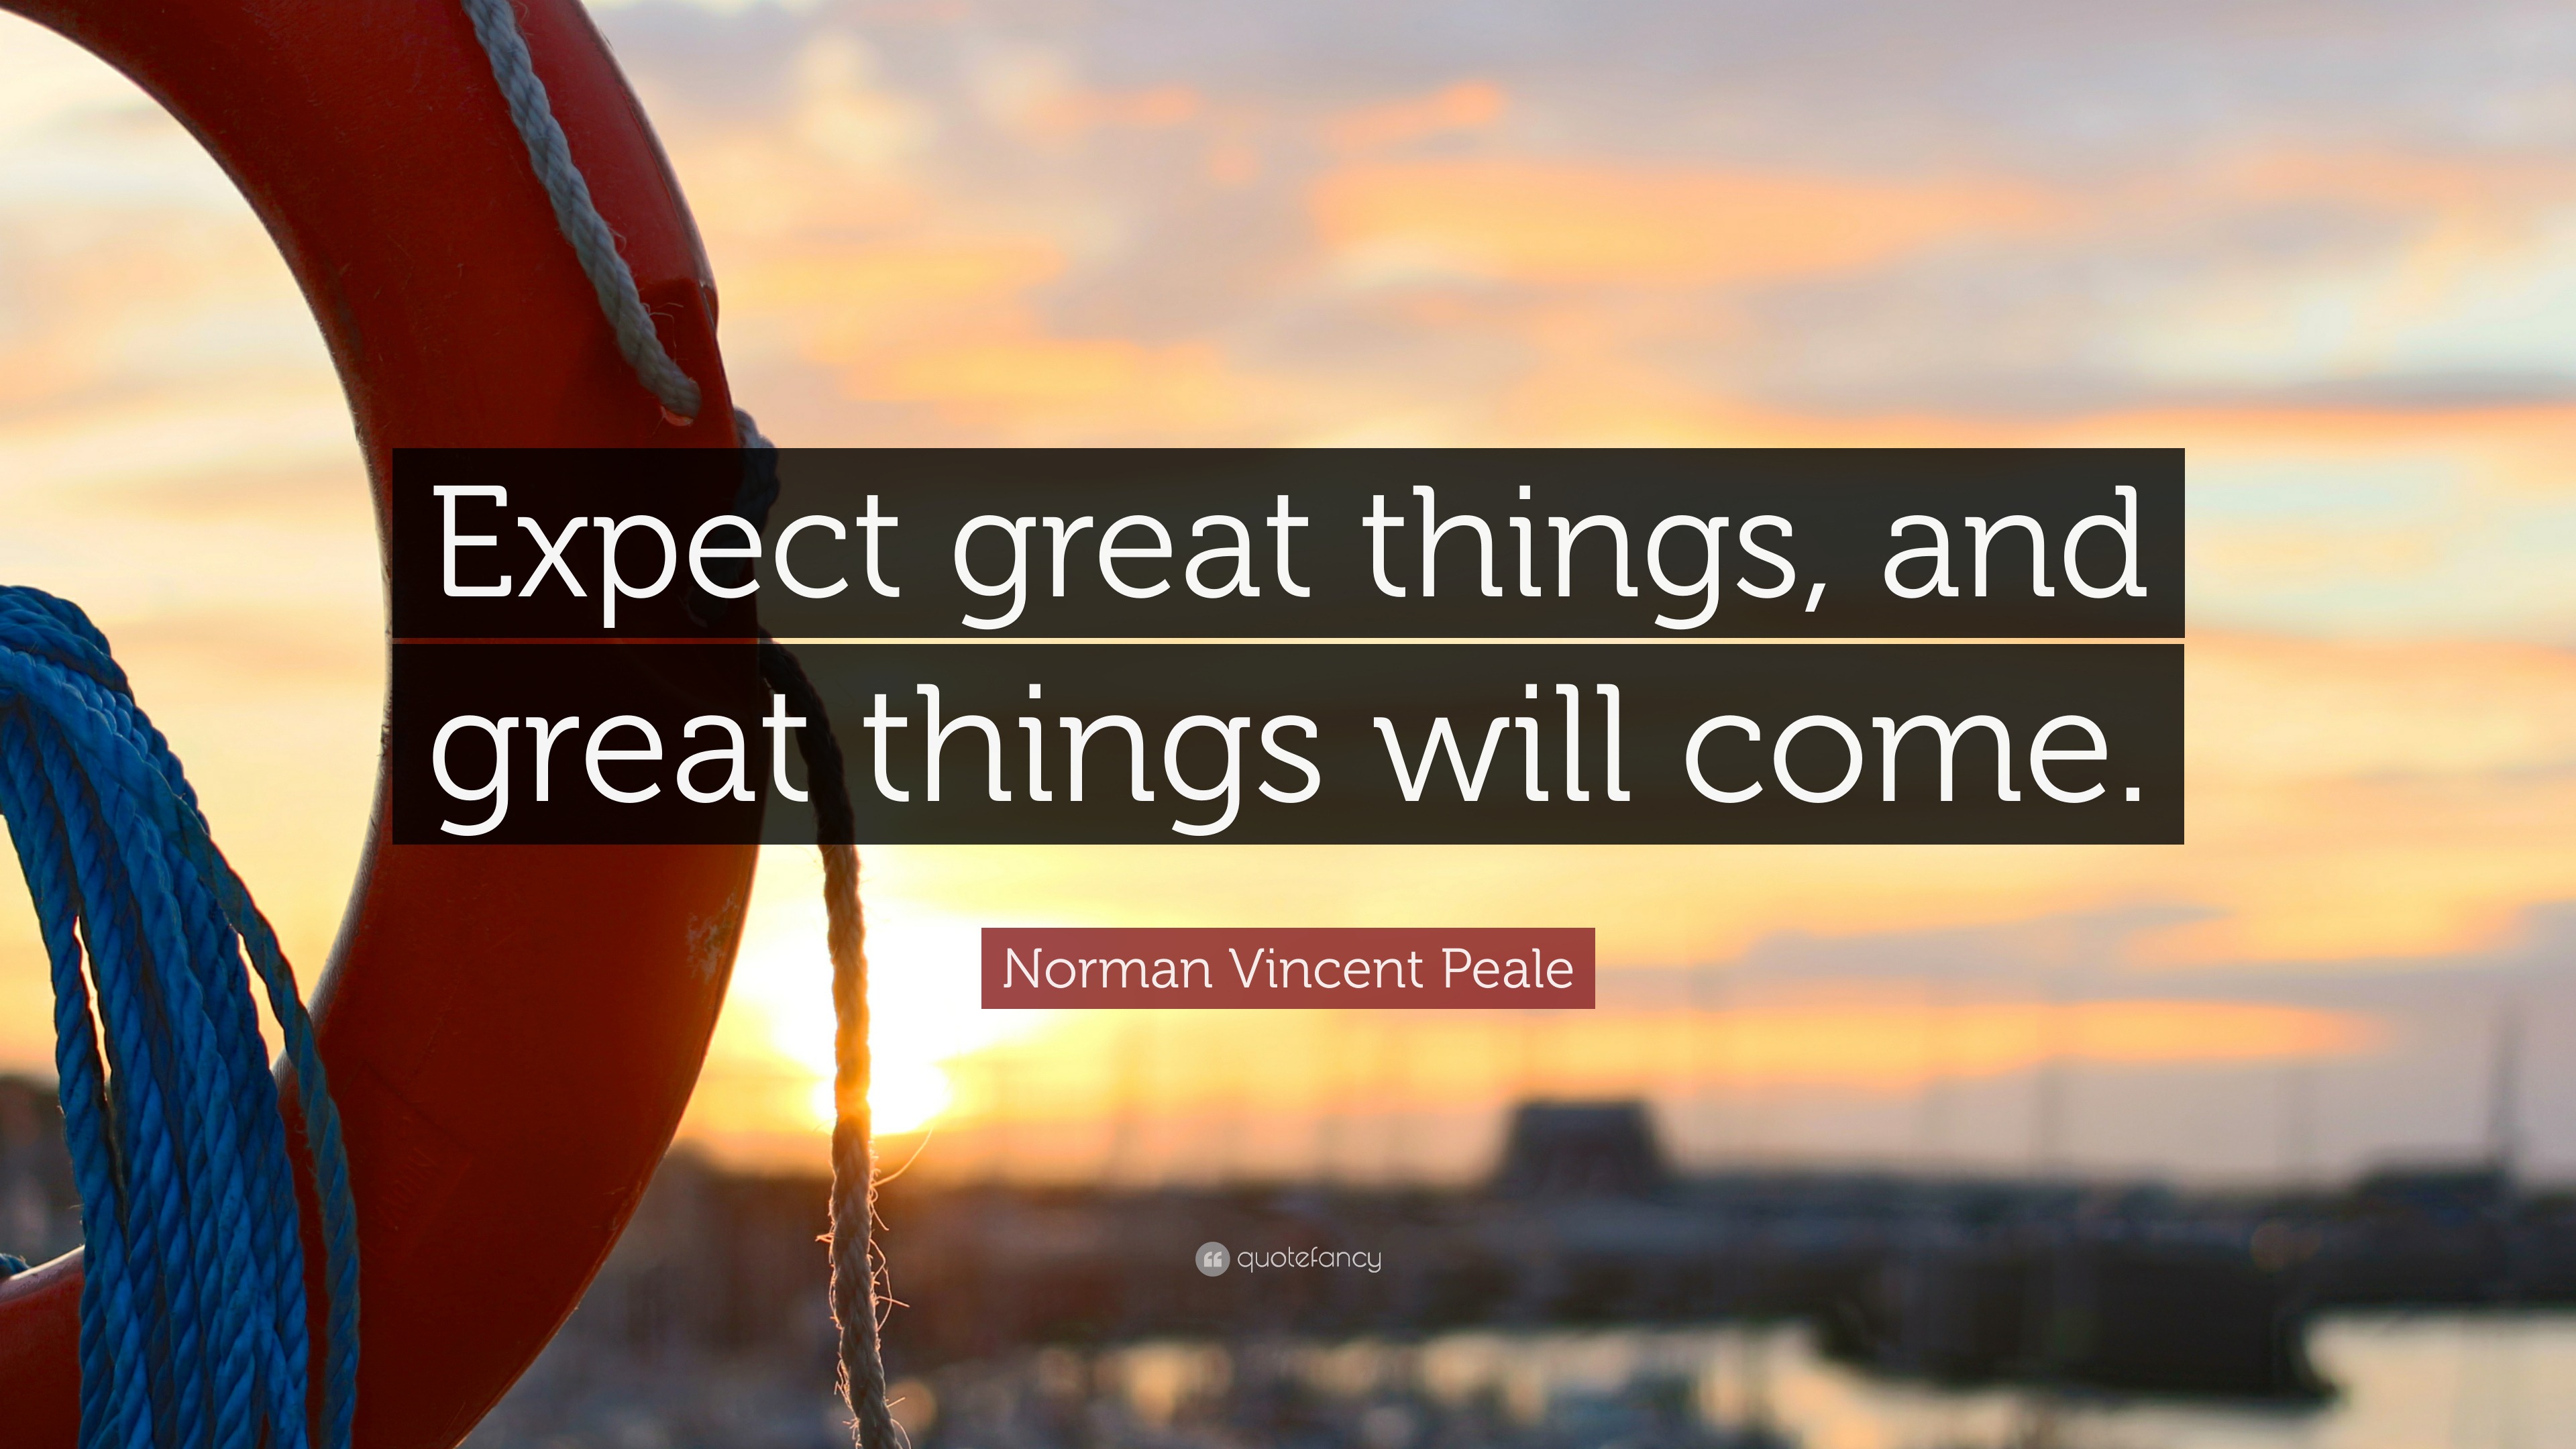 Norman Vincent Peale Quote “expect Great Things And Great Things Will